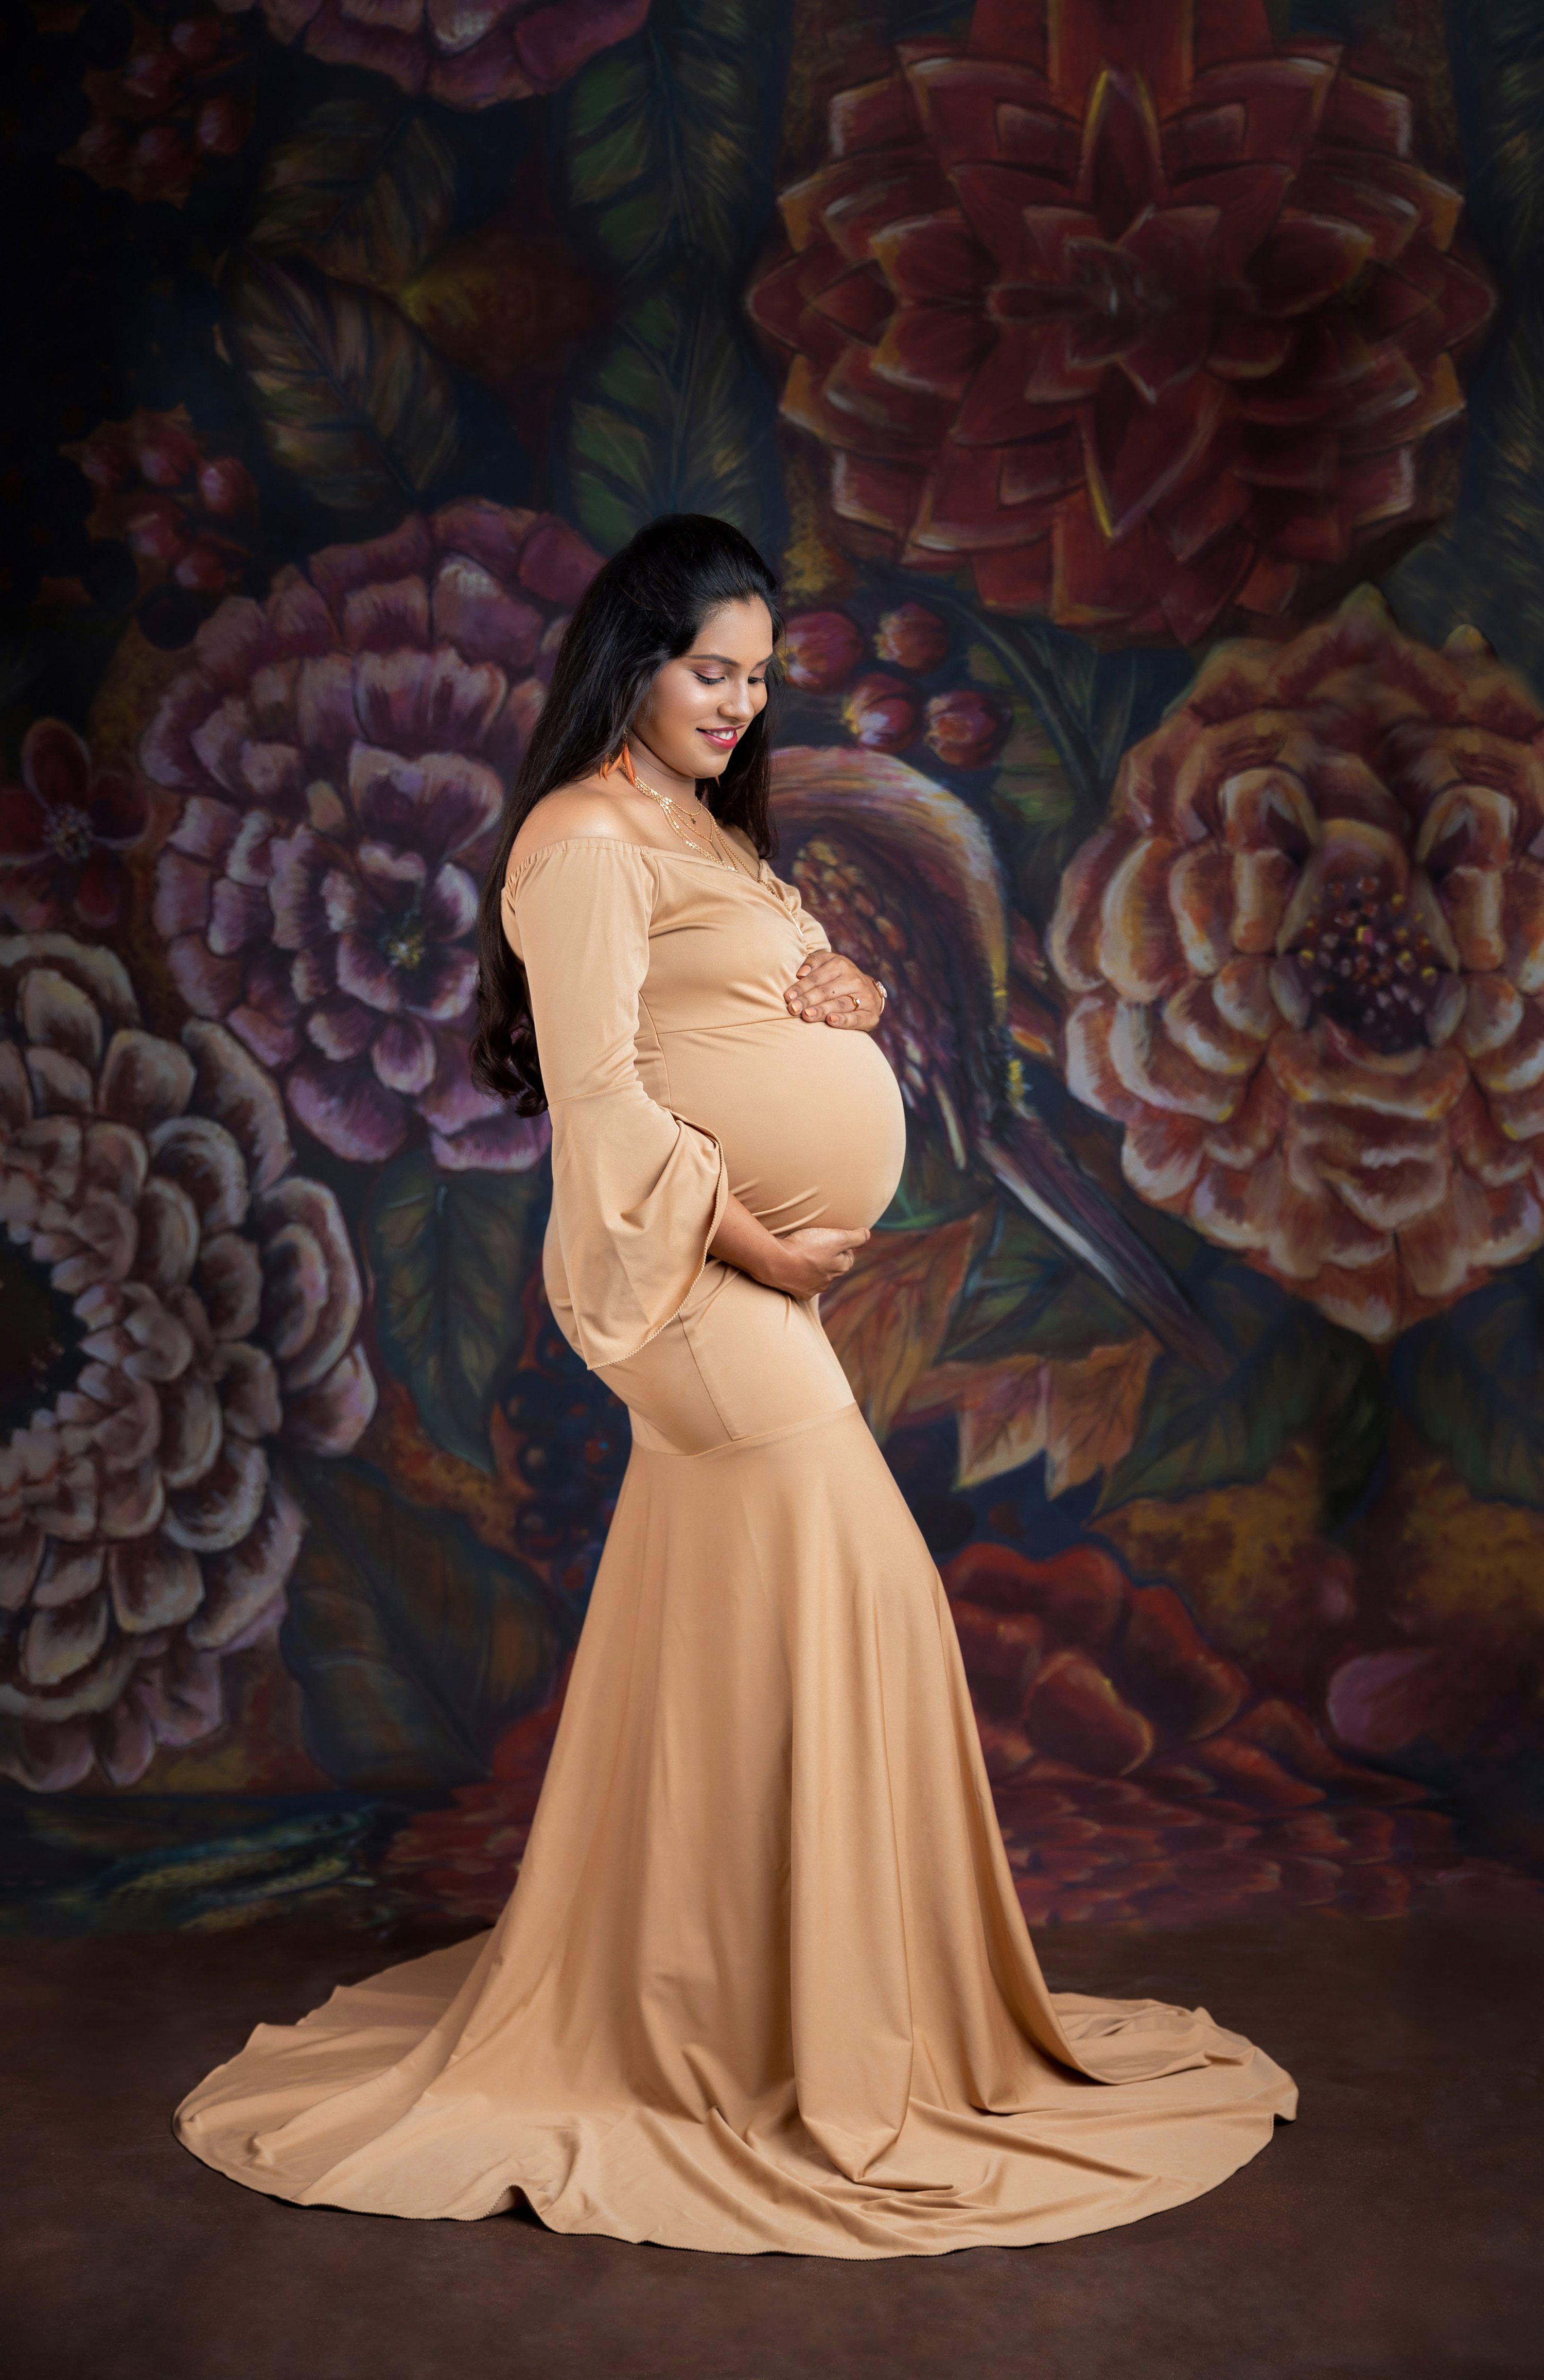 Elegant and classy Maternity photoshoot captured in our studio